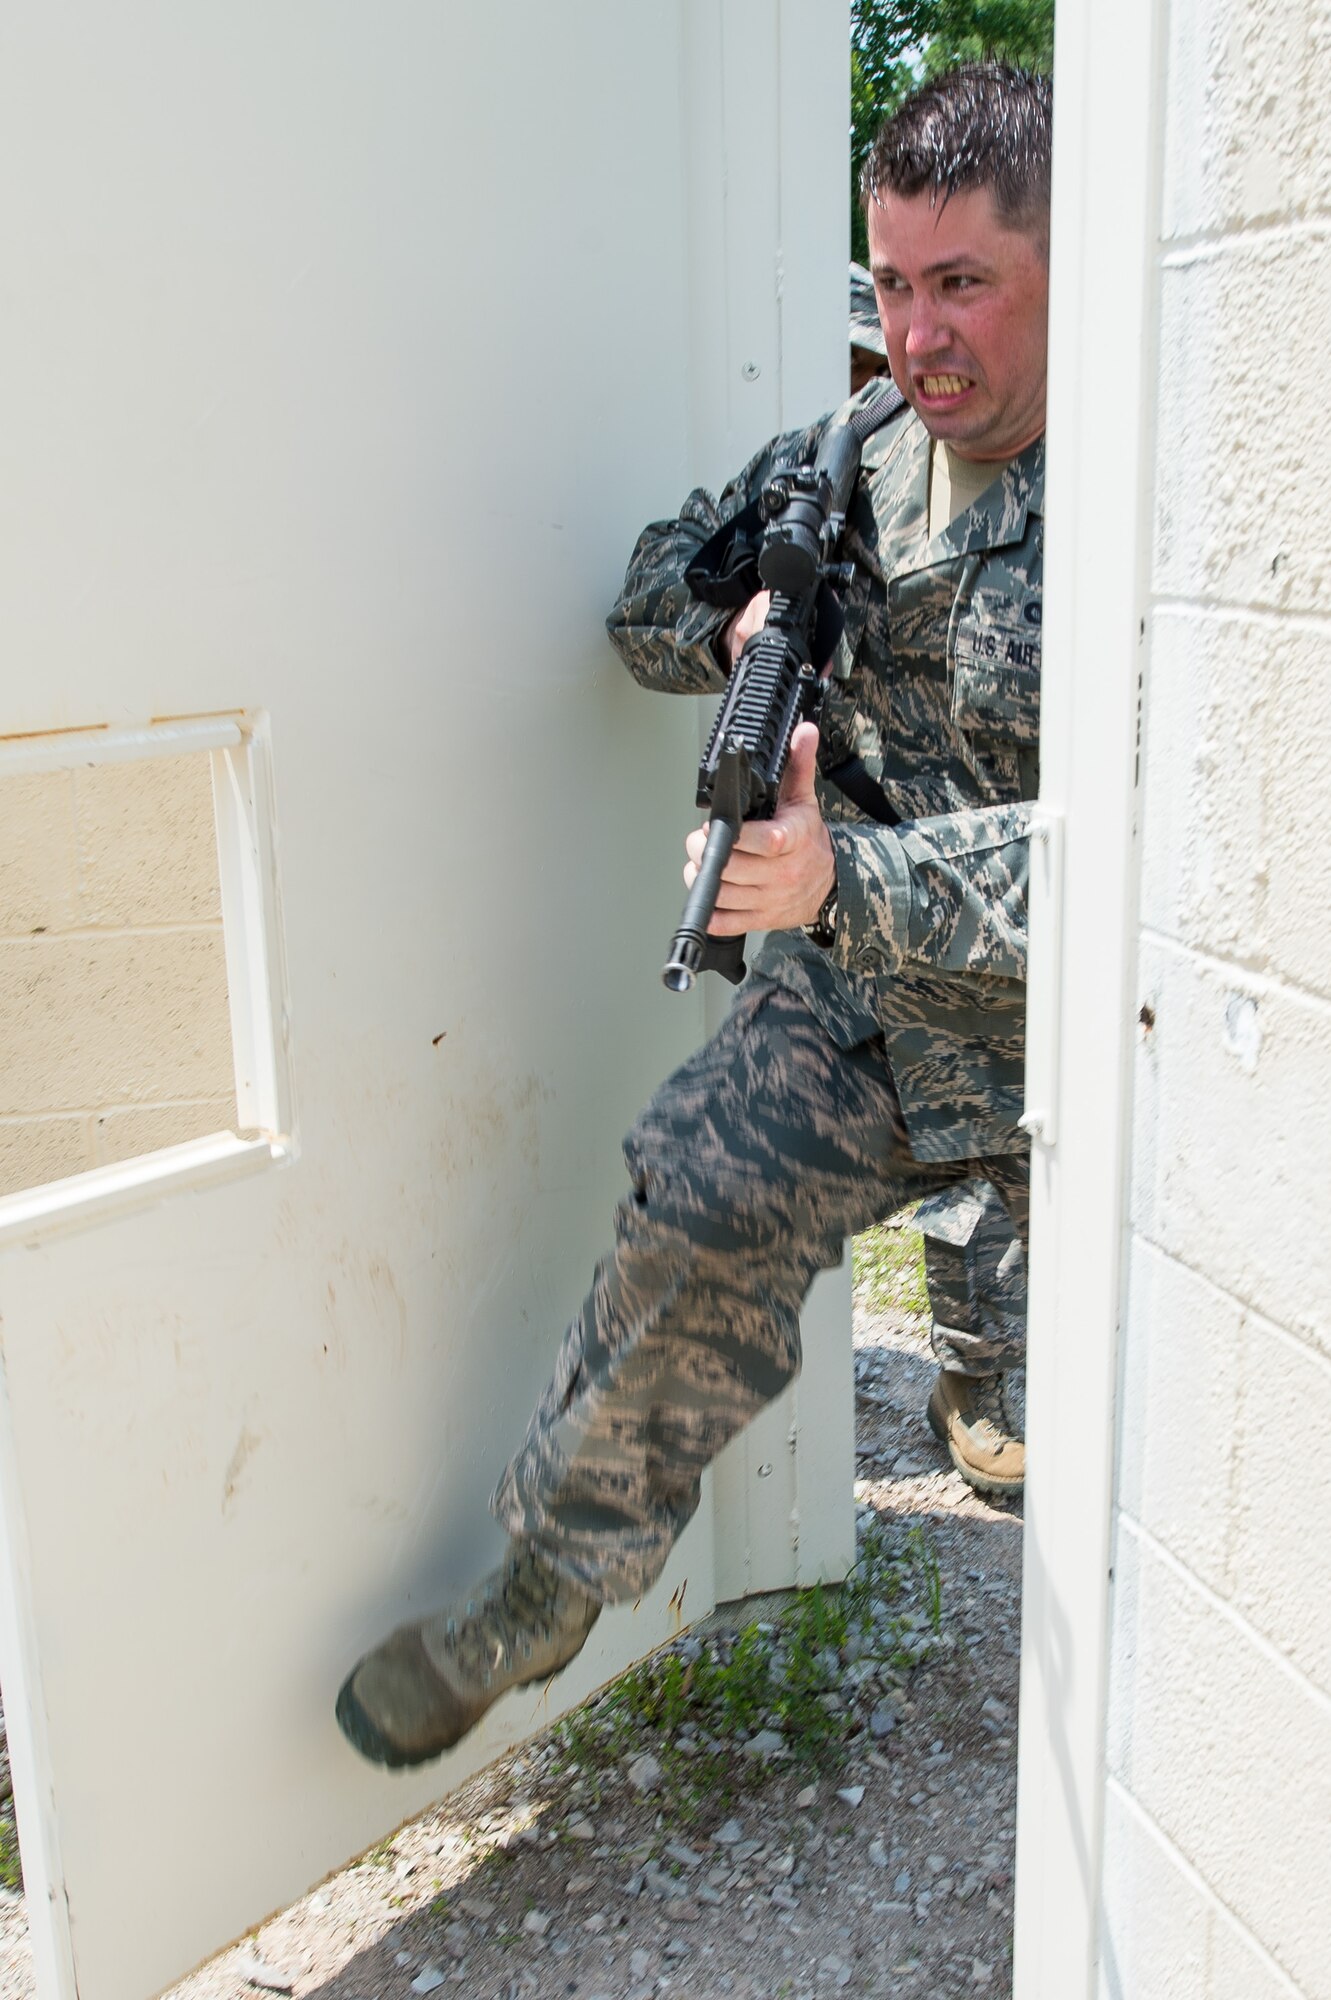 U.S Air Force Staff Sgt. Sean Reed, a member of the 116th Security Forces Squadron, Georgia Air National Guard, breaches a building during training at the Catoosa Training Site, Tunnel Hill, Ga., June 27, 2014. The squadron deployed to the Catoosa Training Site for annual training where they received extensive classroom and hands-on training to hone their skills on various firearms such as the M4 carbine, M203 grenade launcher and M240 and M249 machine guns as well as training in various security operations performed by Air Force security forces personnel. (U.S. Air National Guard photo by Master Sgt. Roger Parsons/Released)